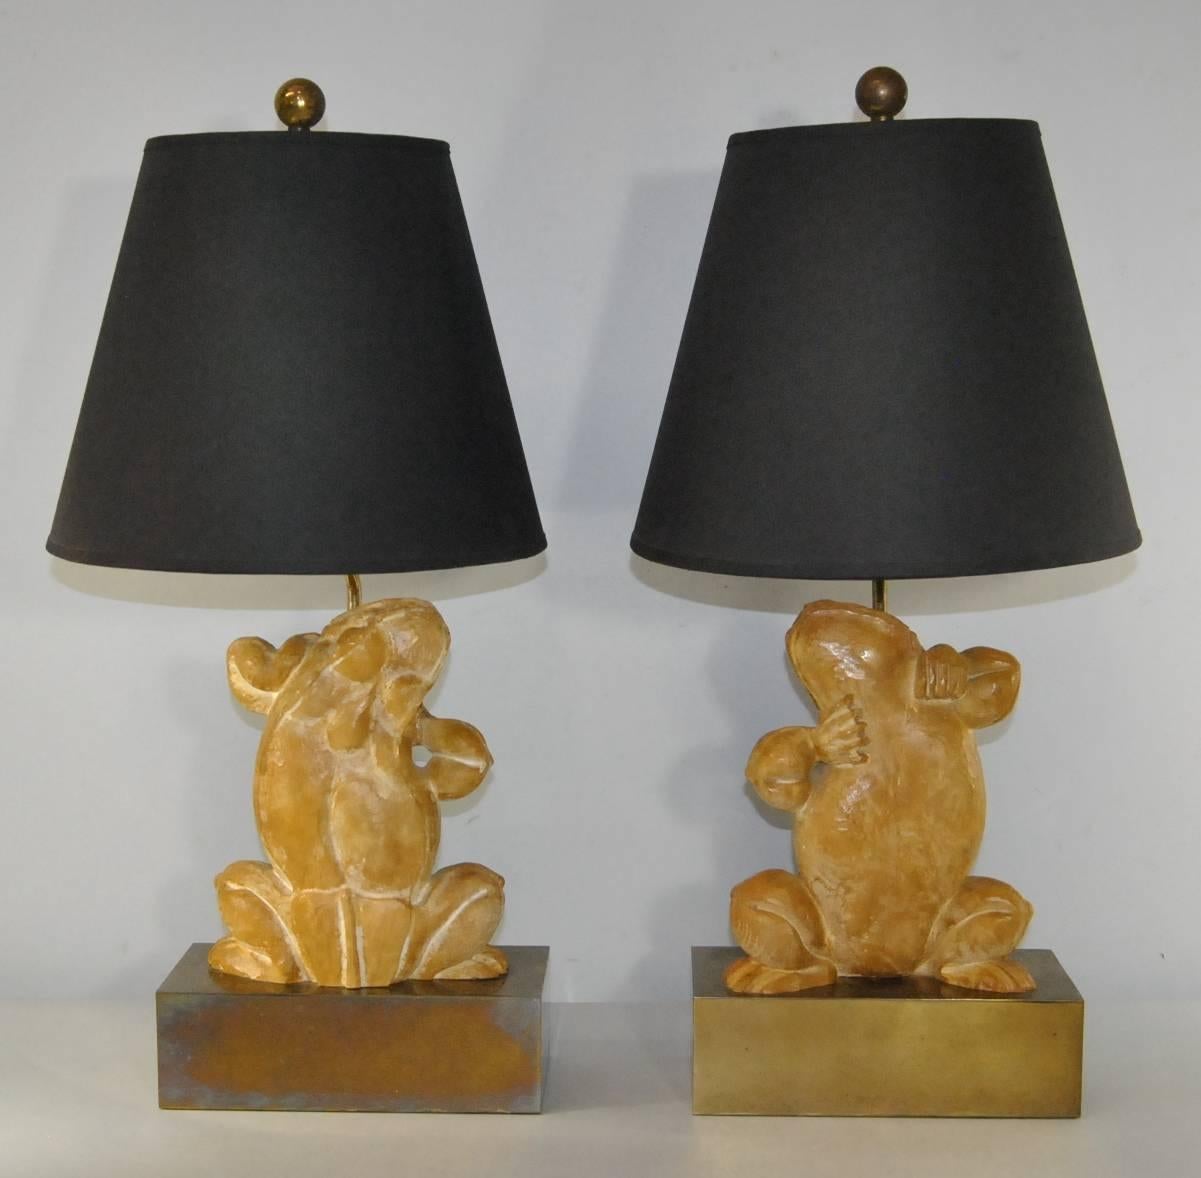 Pair of Chapman dancing frogs table lamps. Stylized composition frogs are made to resemble carved wood atop a rectangular brass base. There is some oxidation on the bases. Good wiring. Marked Chapman on the socket. Measures: Frogs are 9 1/2